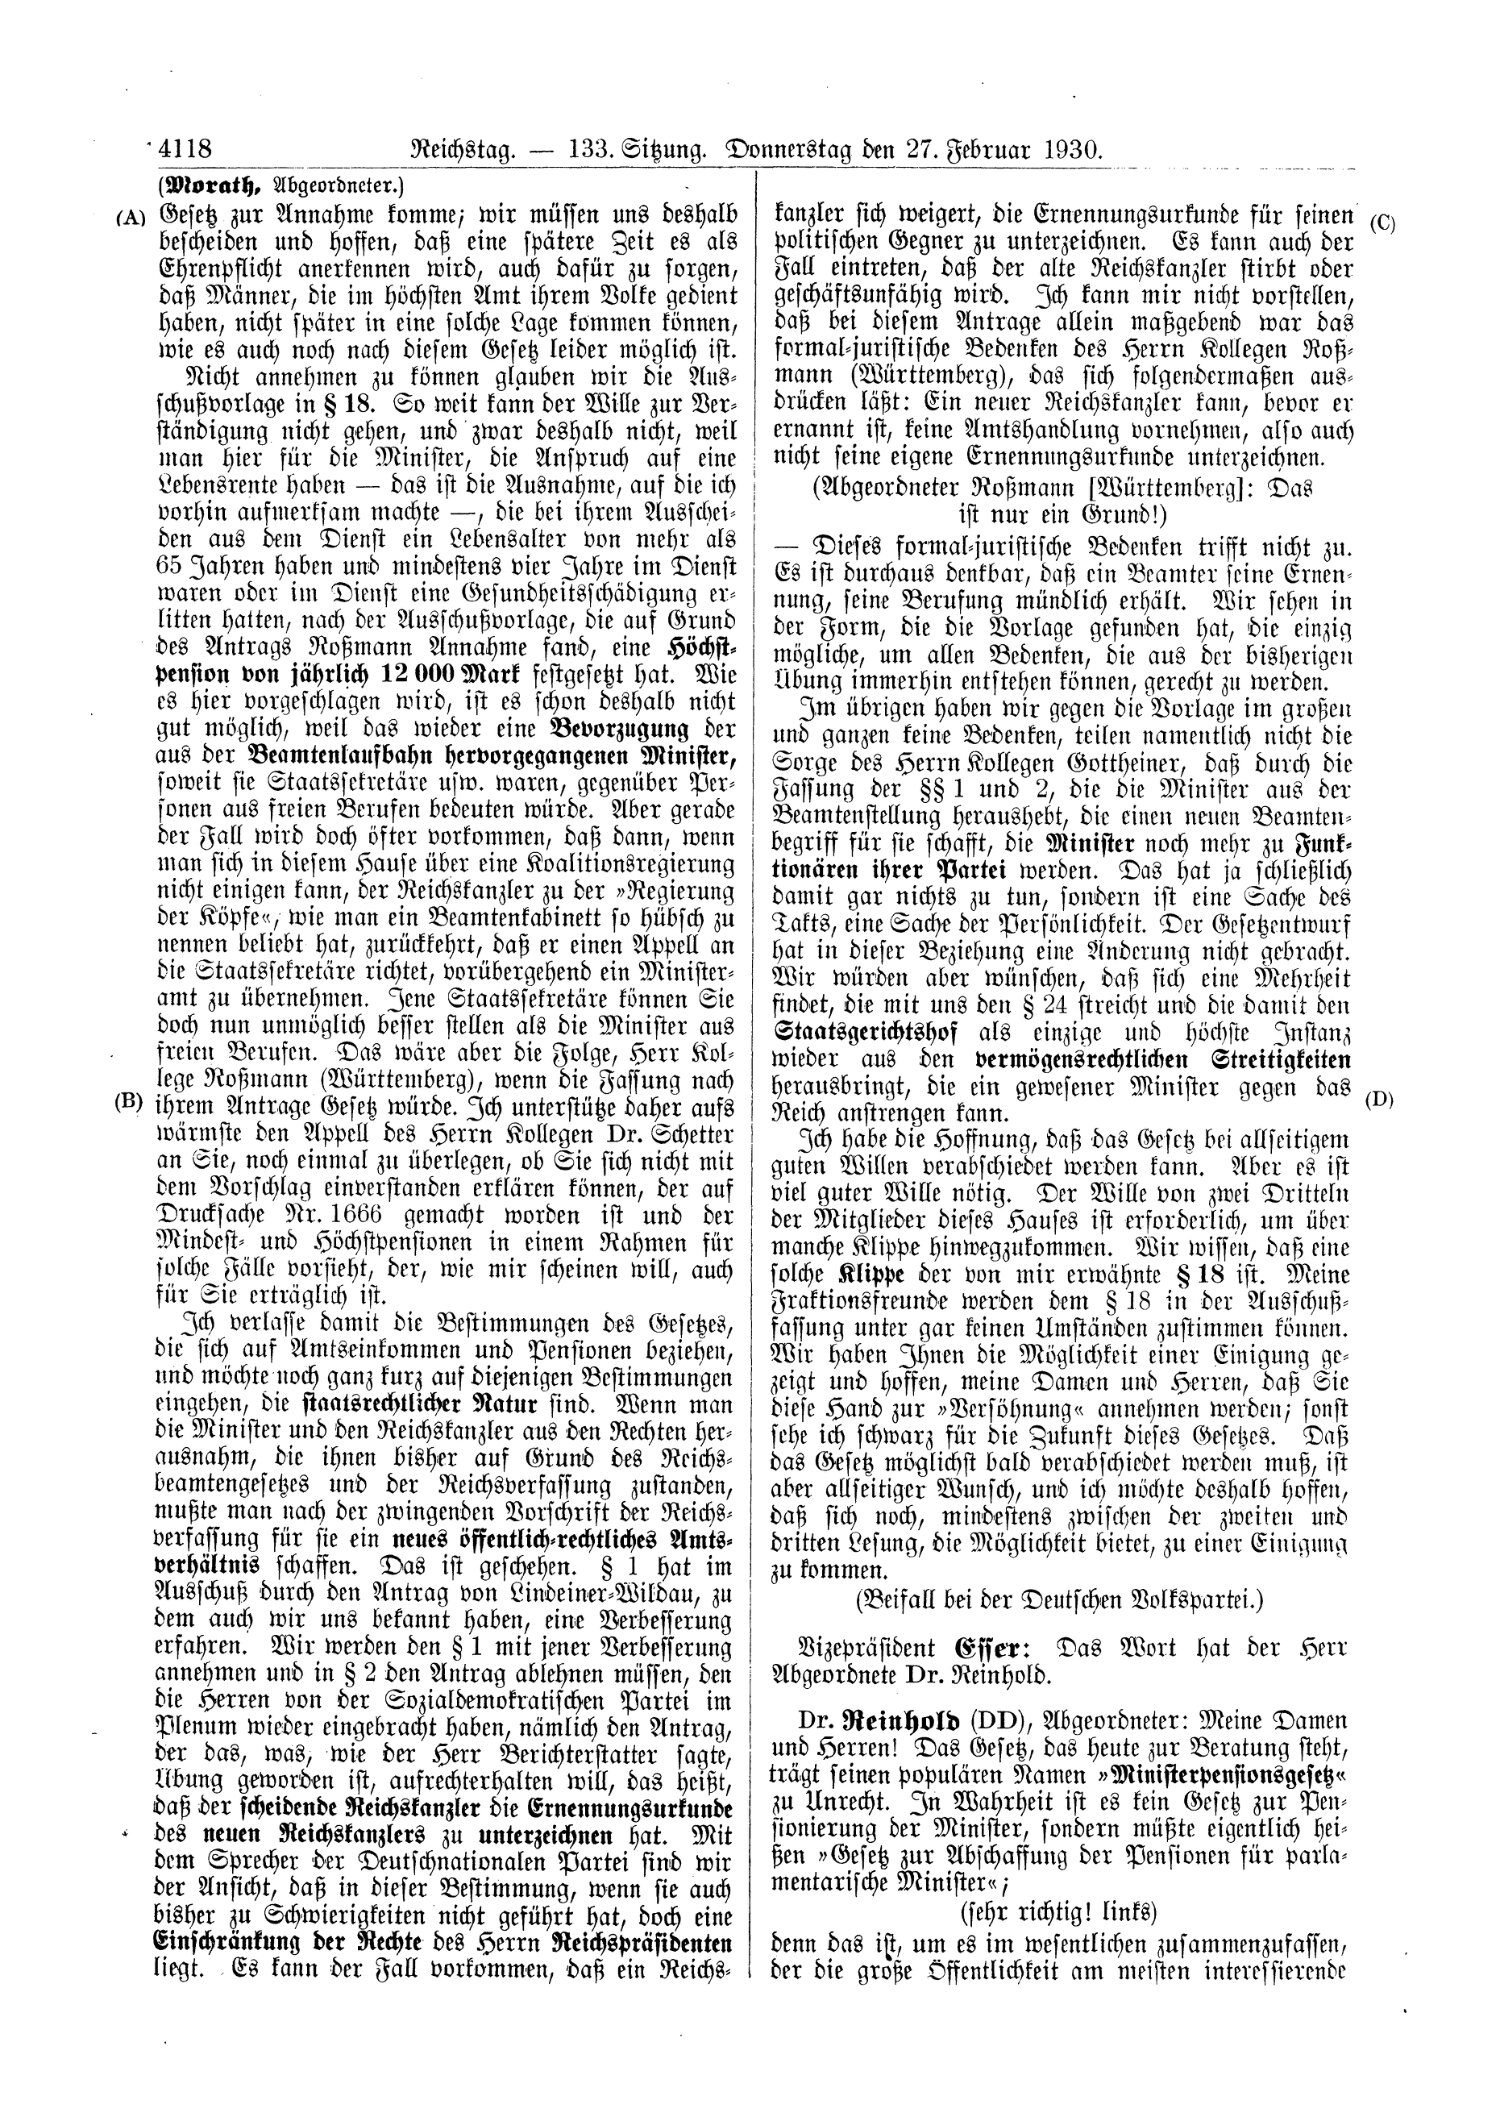 Scan of page 4118